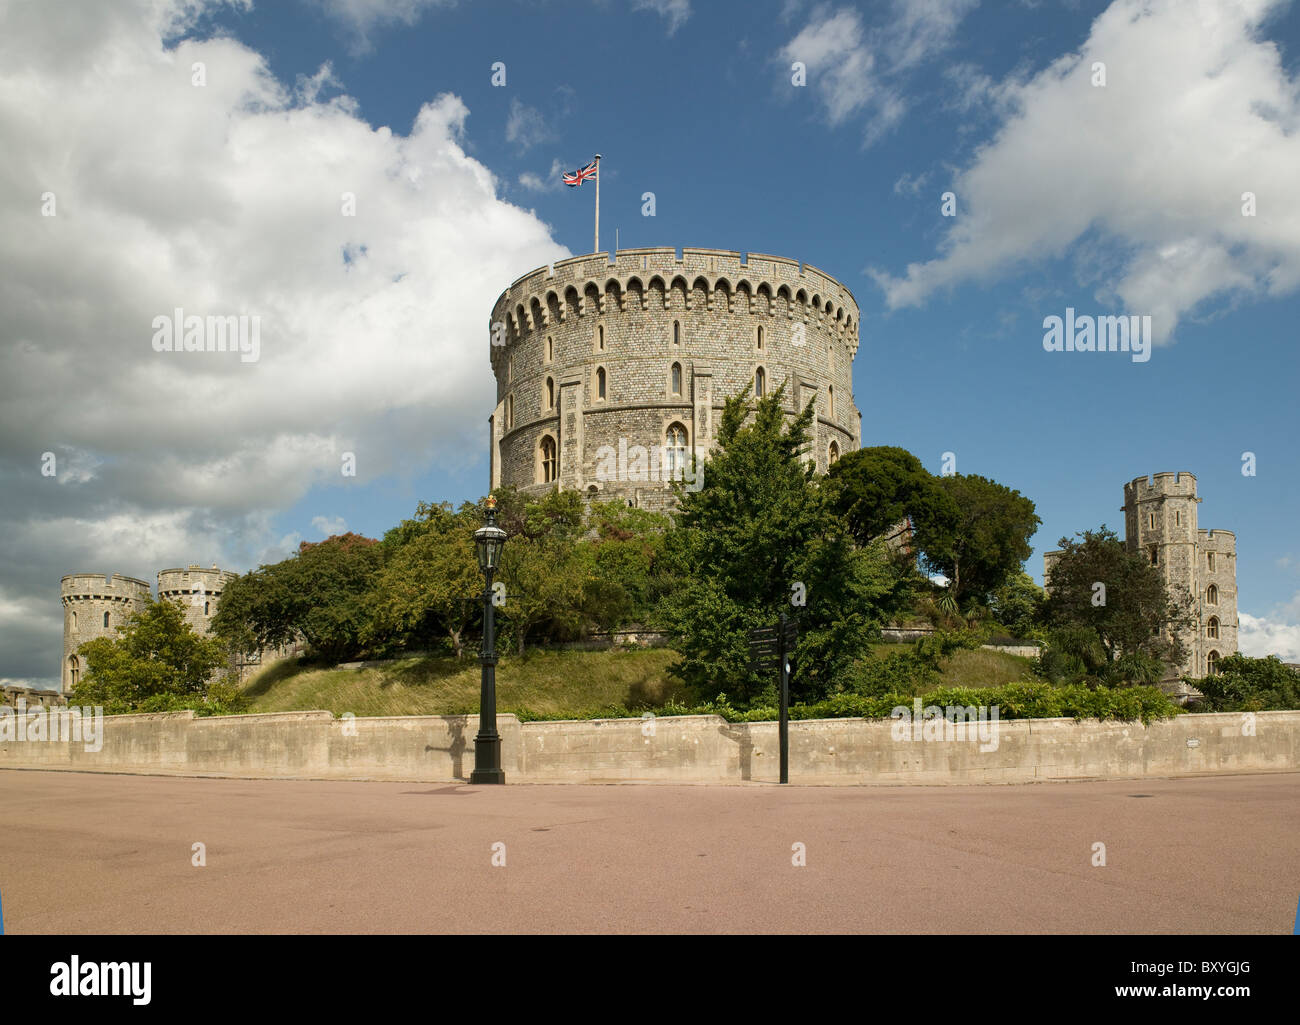 Windsor Castle, Berkshire. The Round Tower on the motte, original medieval keep remodelled by Wyatville in 1828-31. Stock Photo